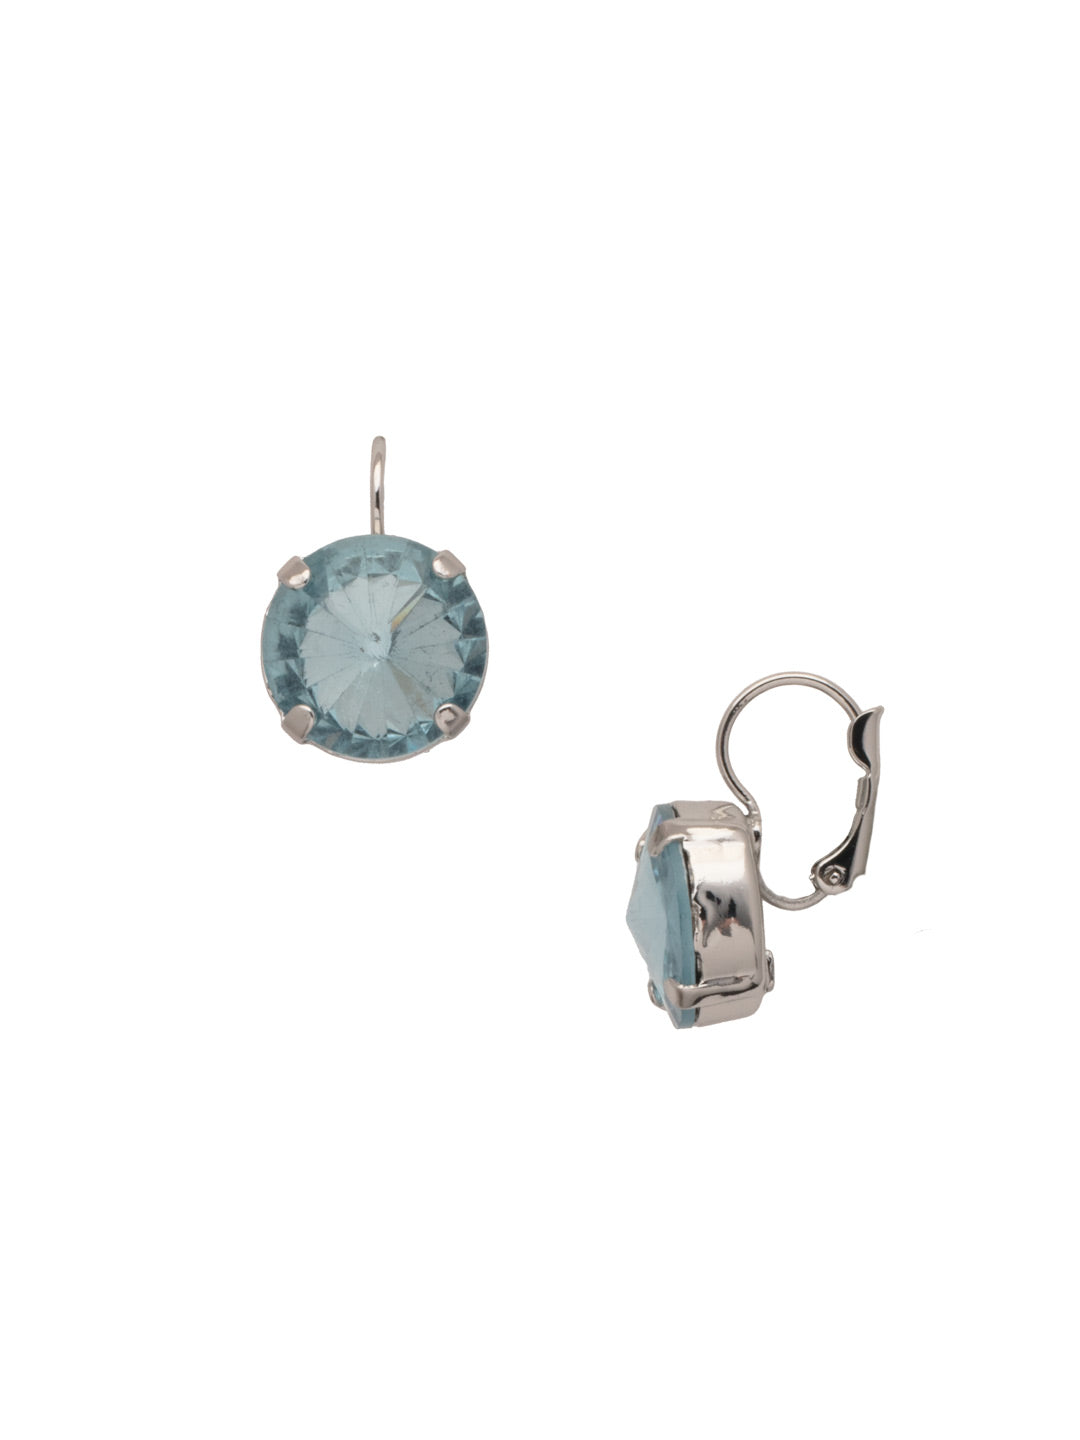 Radiant Round Dangle Earring - EDH108PDLA - <p>Shine on! This bright, petite earring offers sparkle for days and integrated seamlessly into any look.. From Sorrelli's Light Azore collection in our Palladium finish.</p>